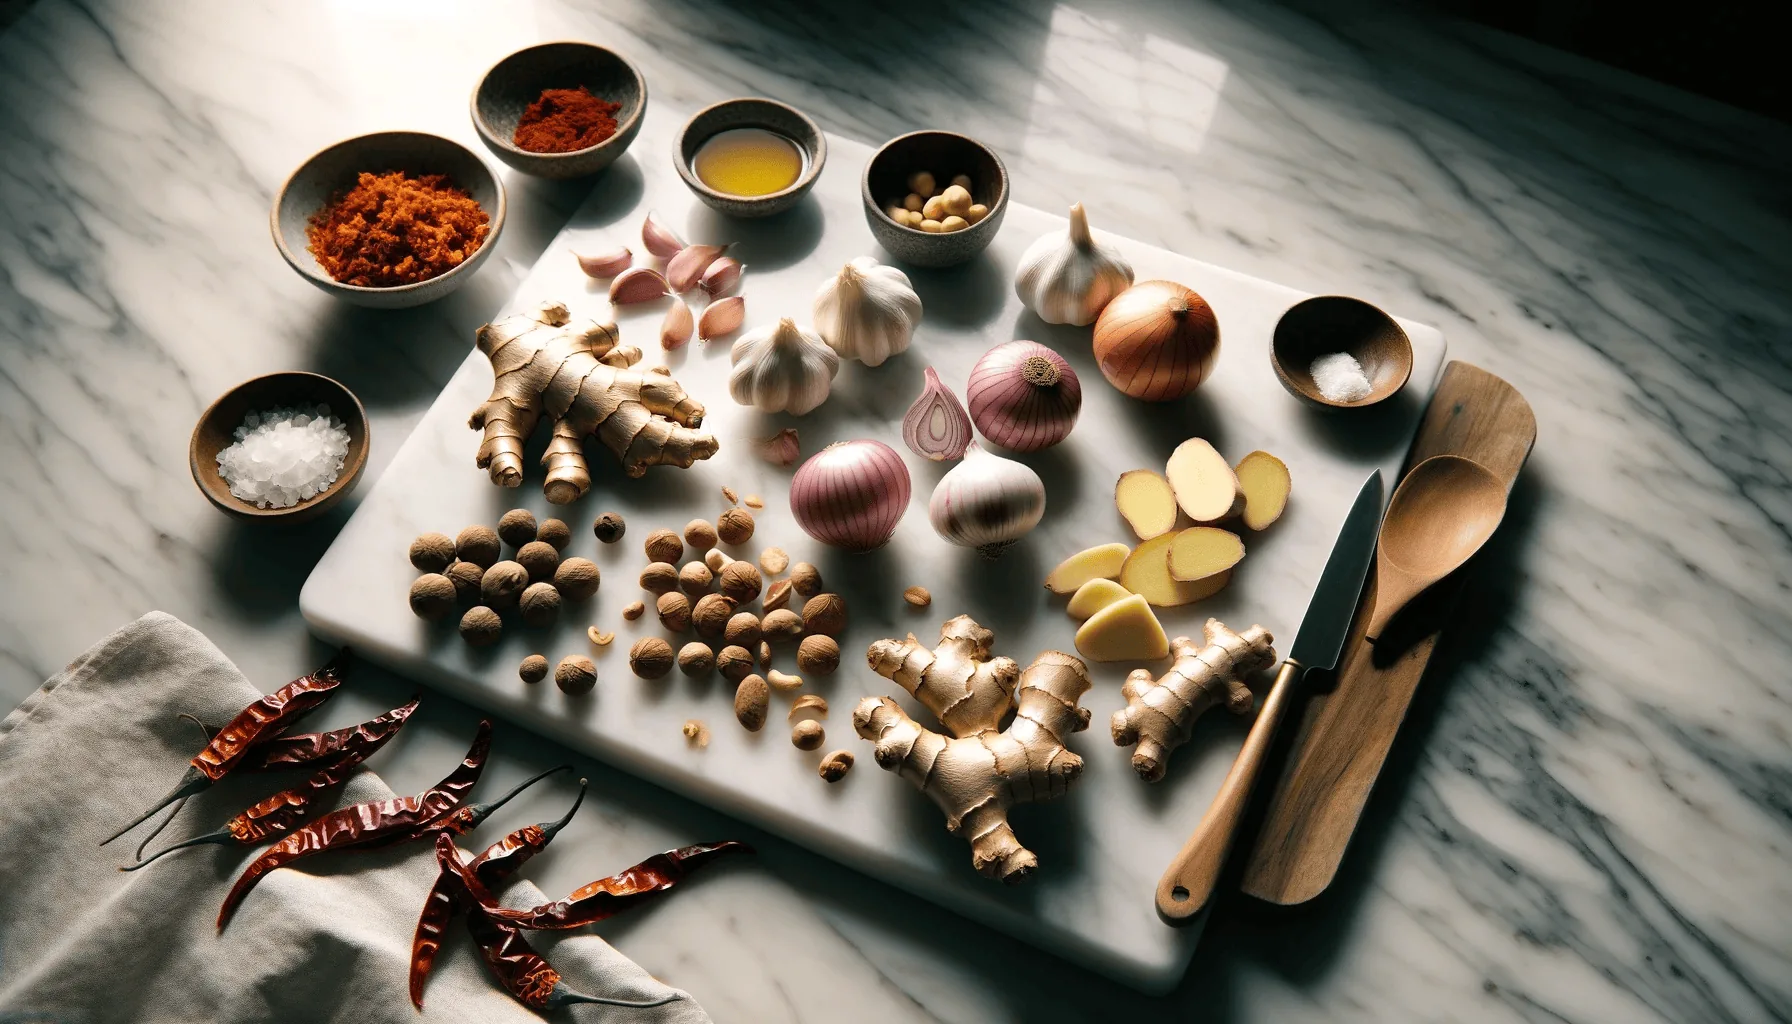 Onions, garlic, ginger, turmeric, nuts, and chilies are prepared for the recipe